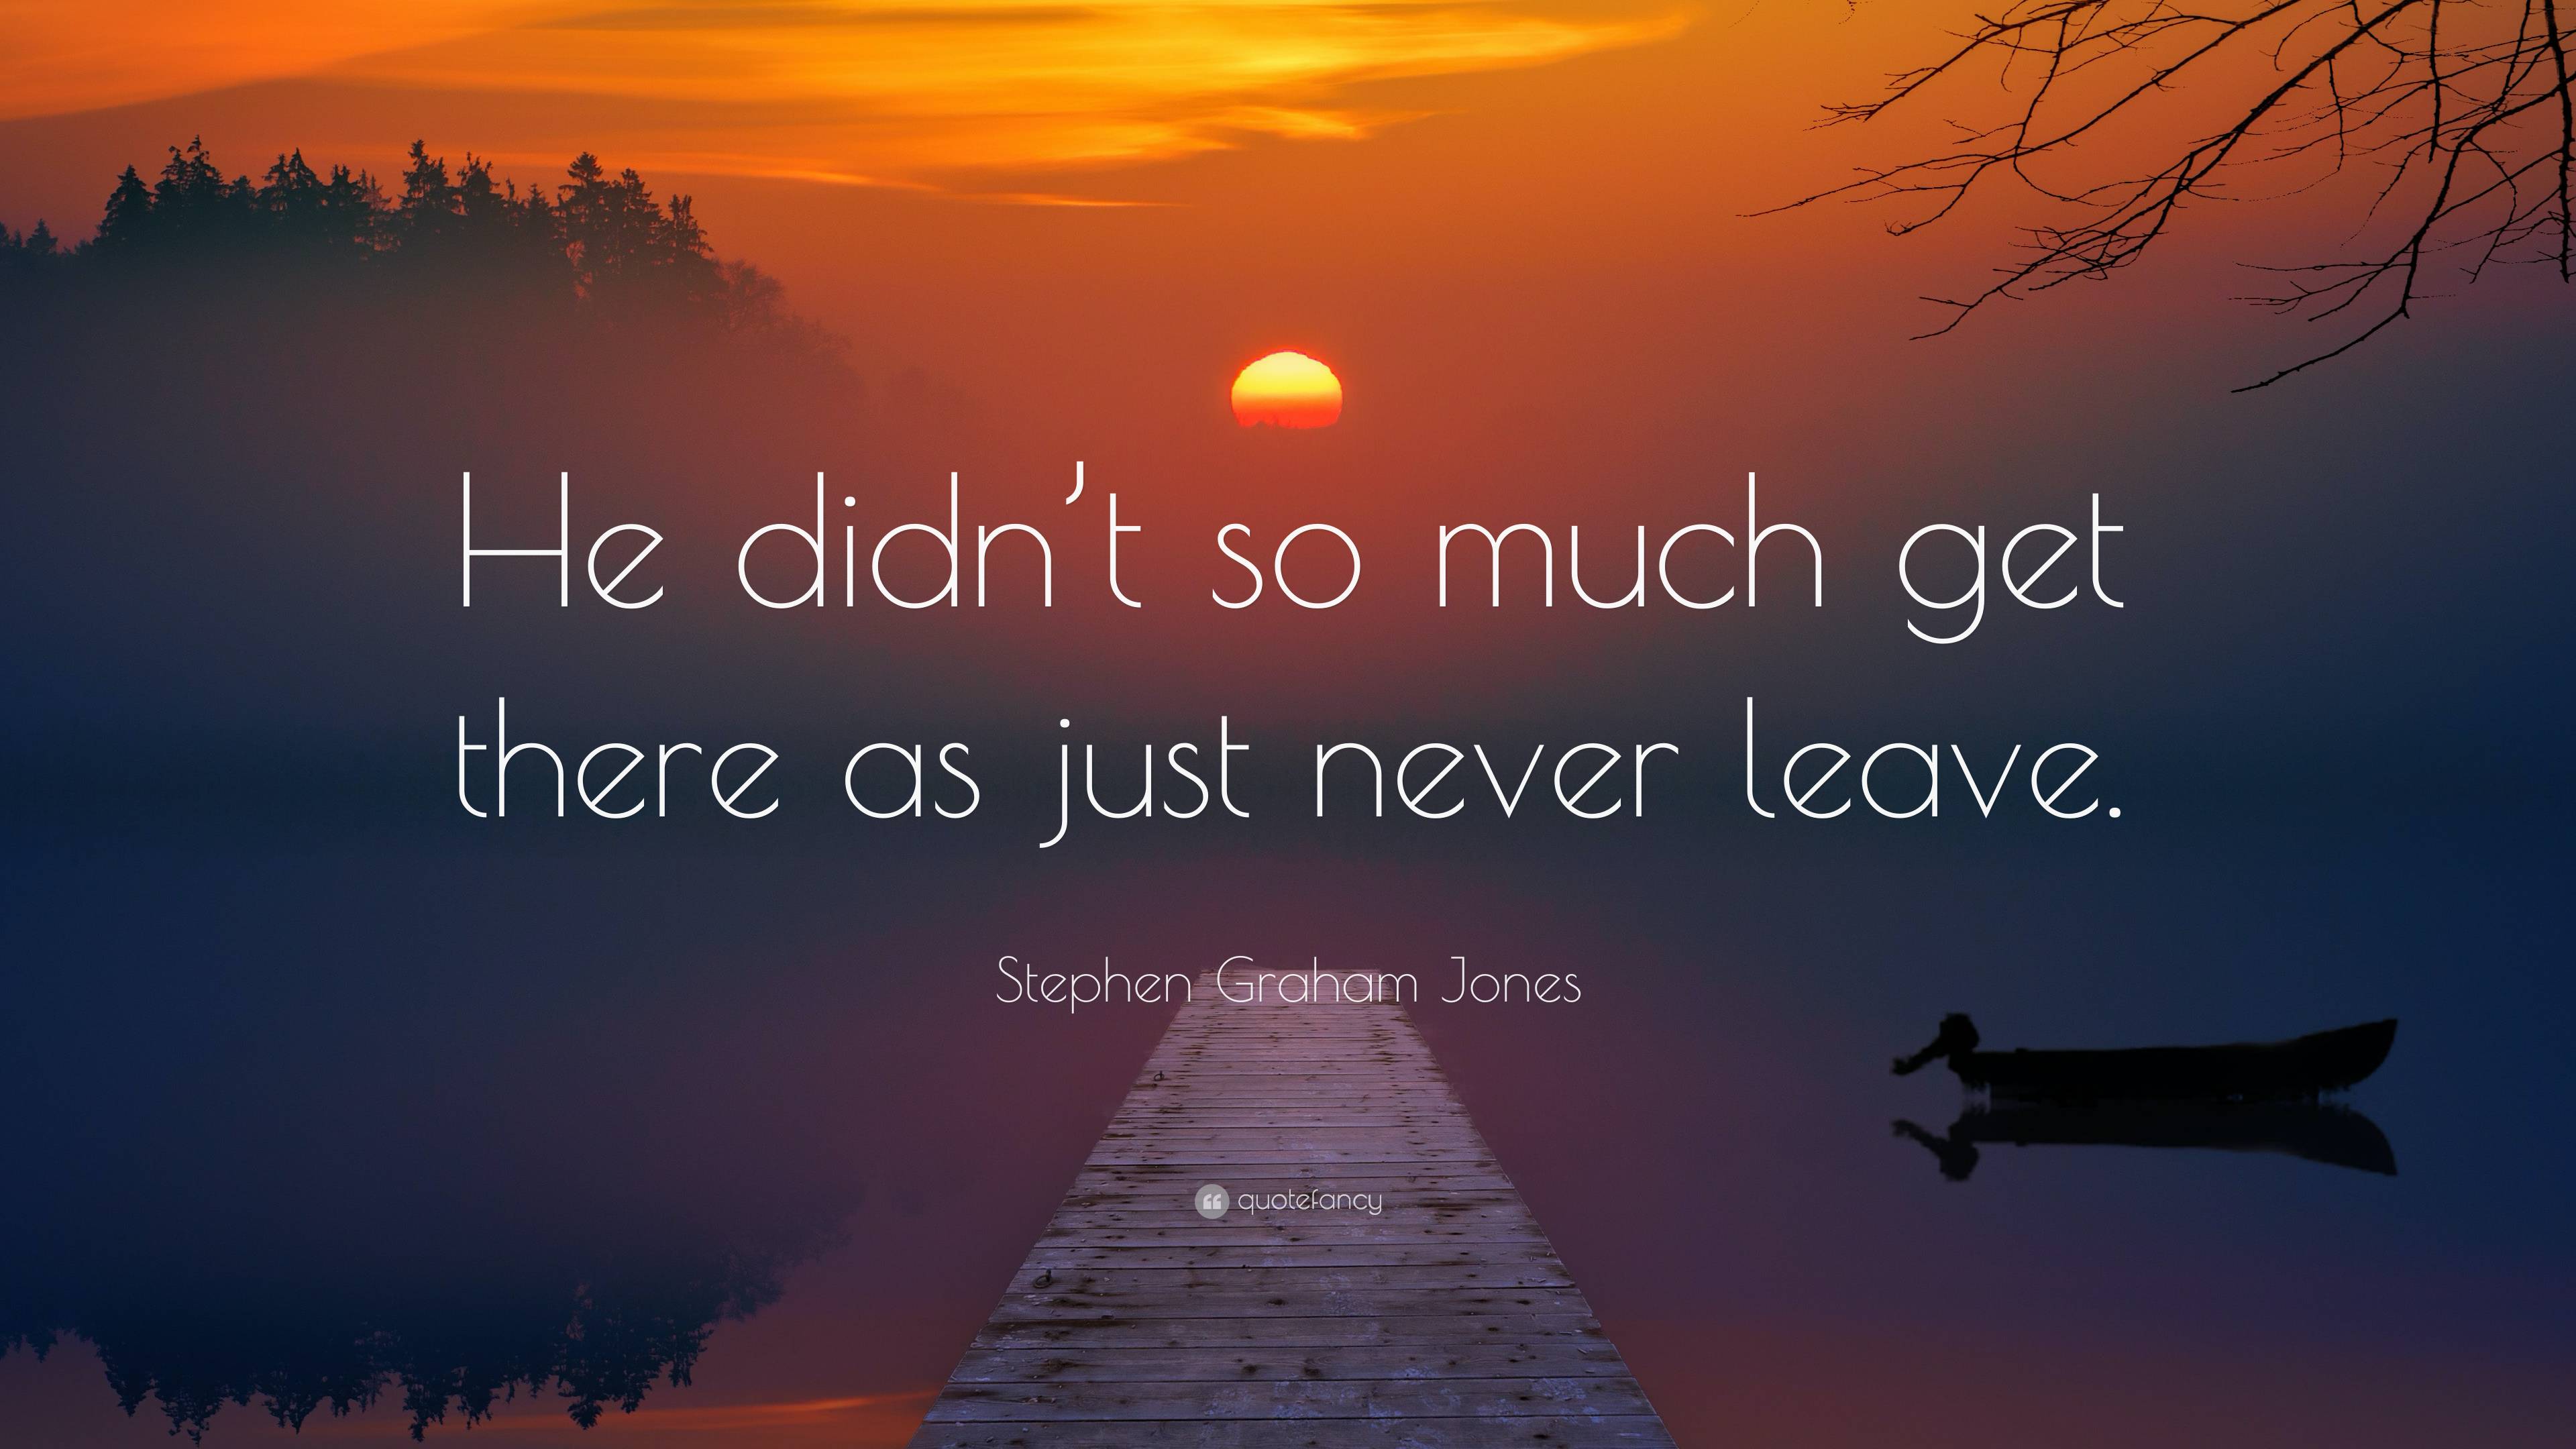 Stephen Graham Jones Quote: “He didn’t so much get there as just never ...